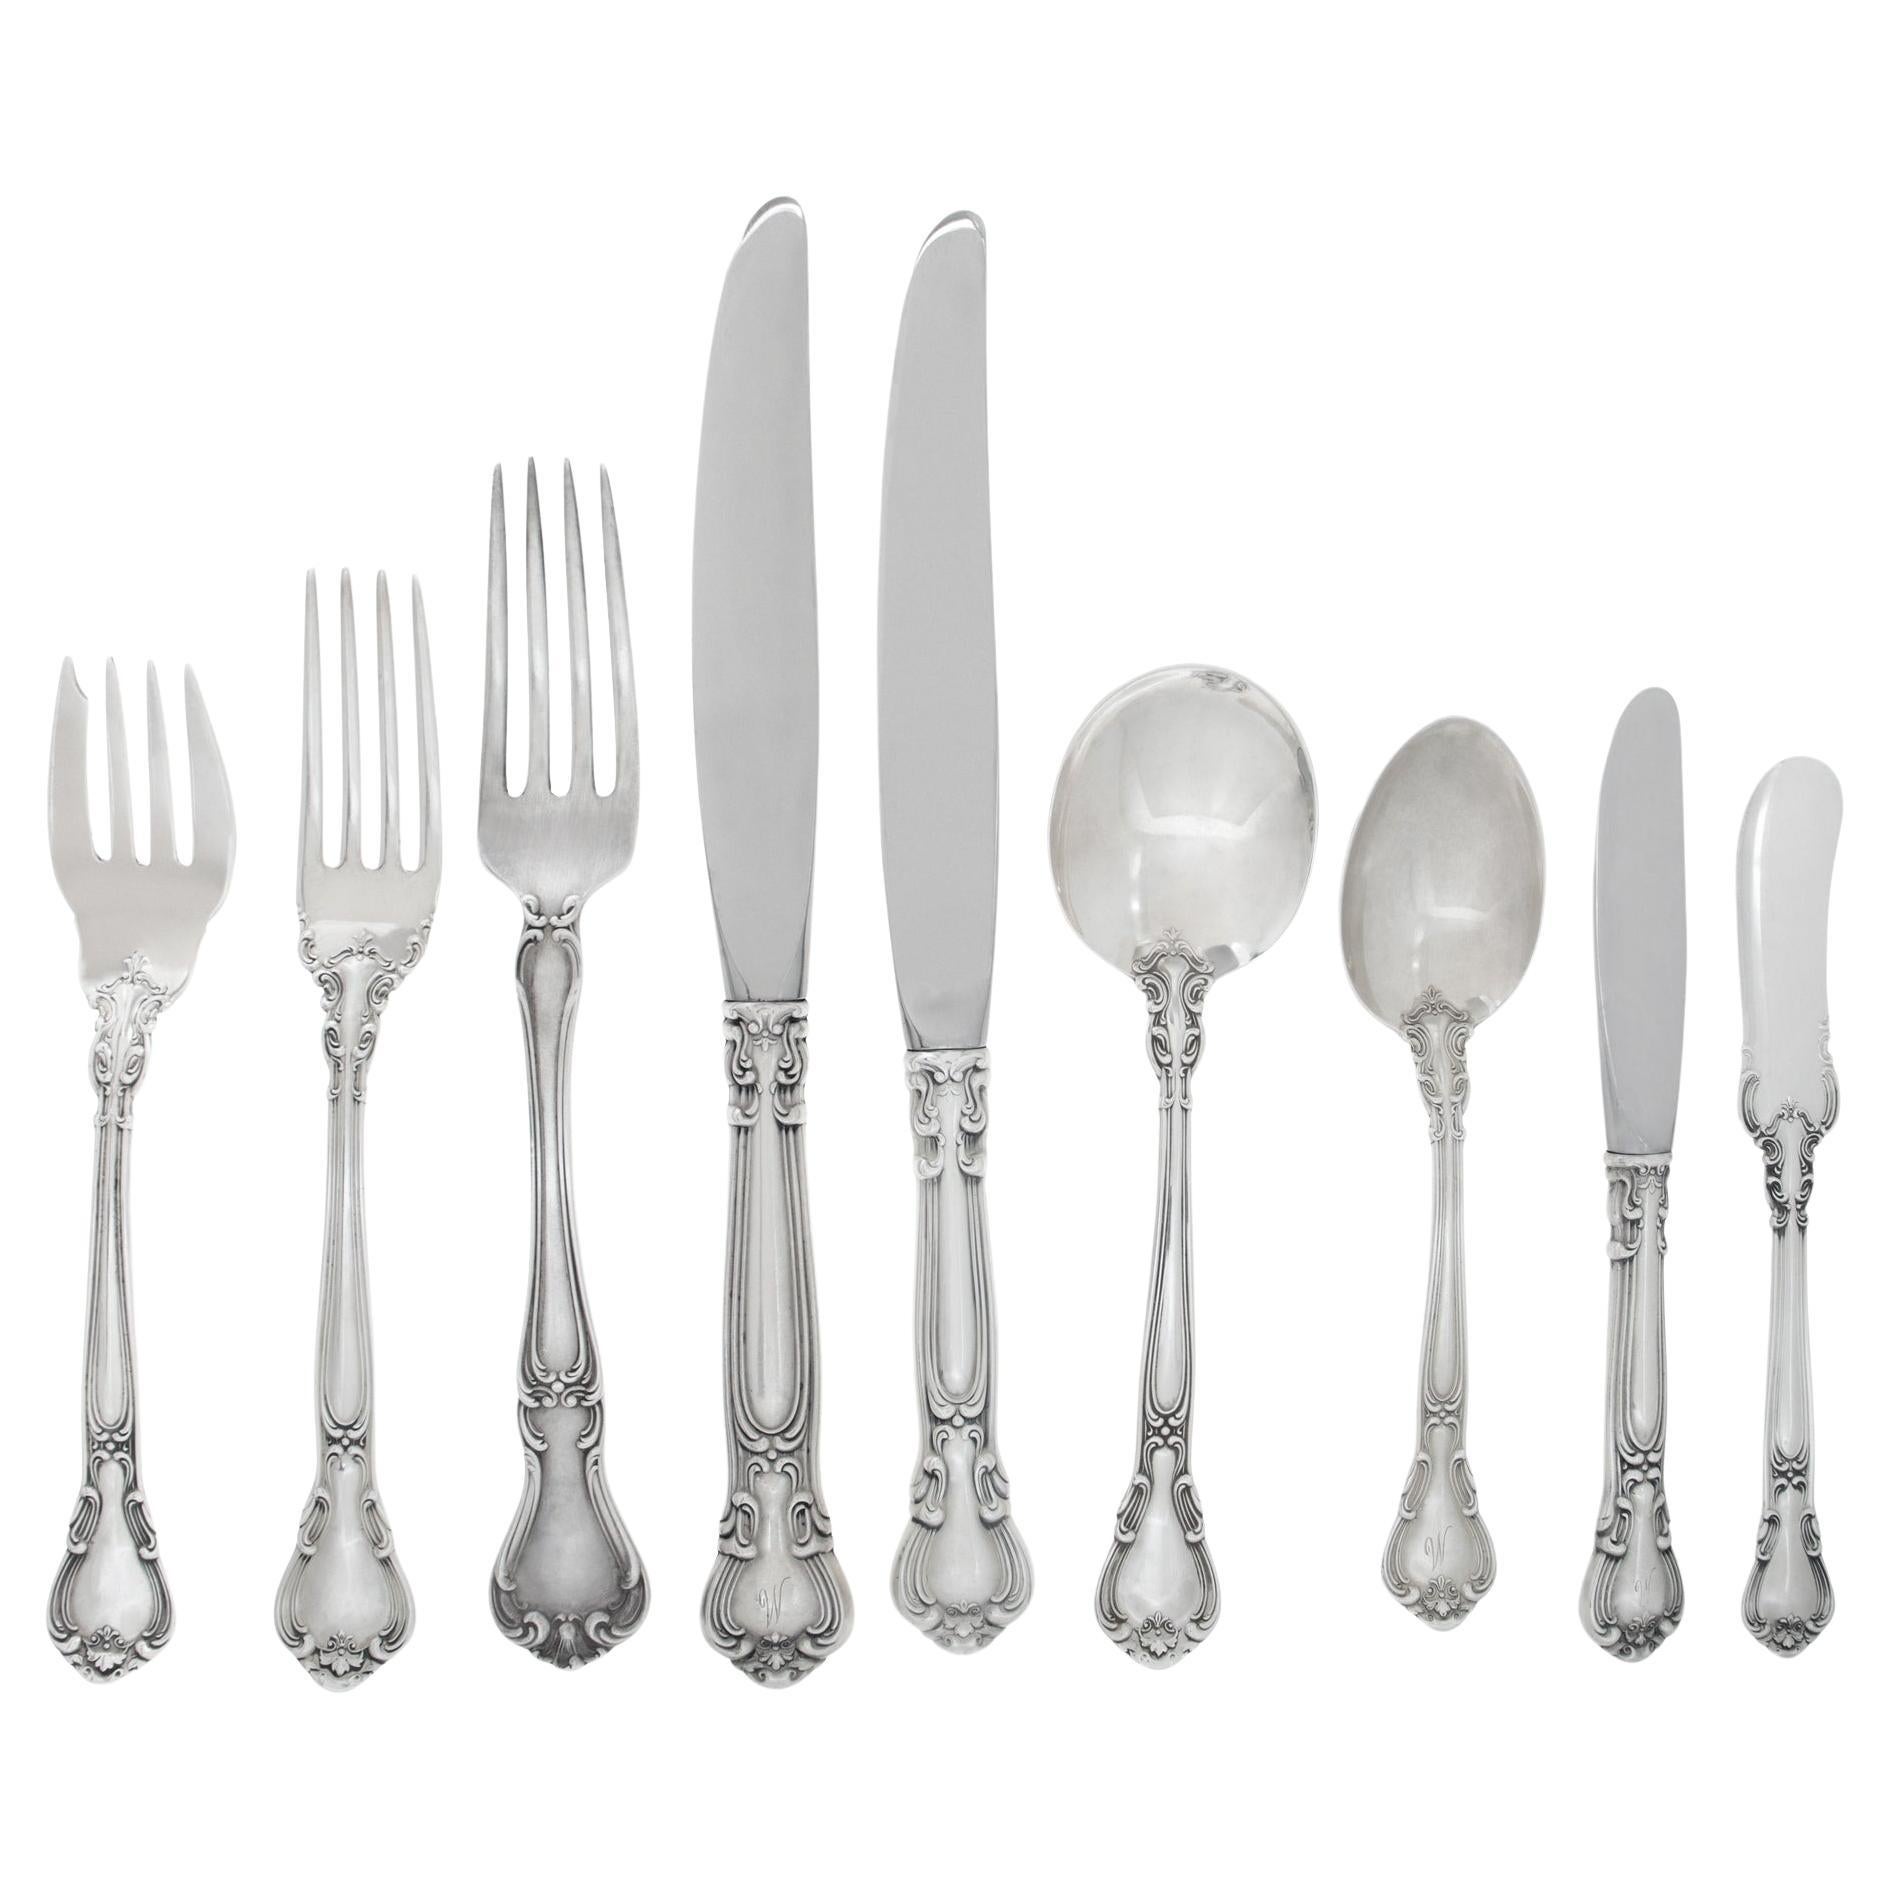 CHANTILLY antique sterling flatware set patented in 1895 by Gorham For Sale